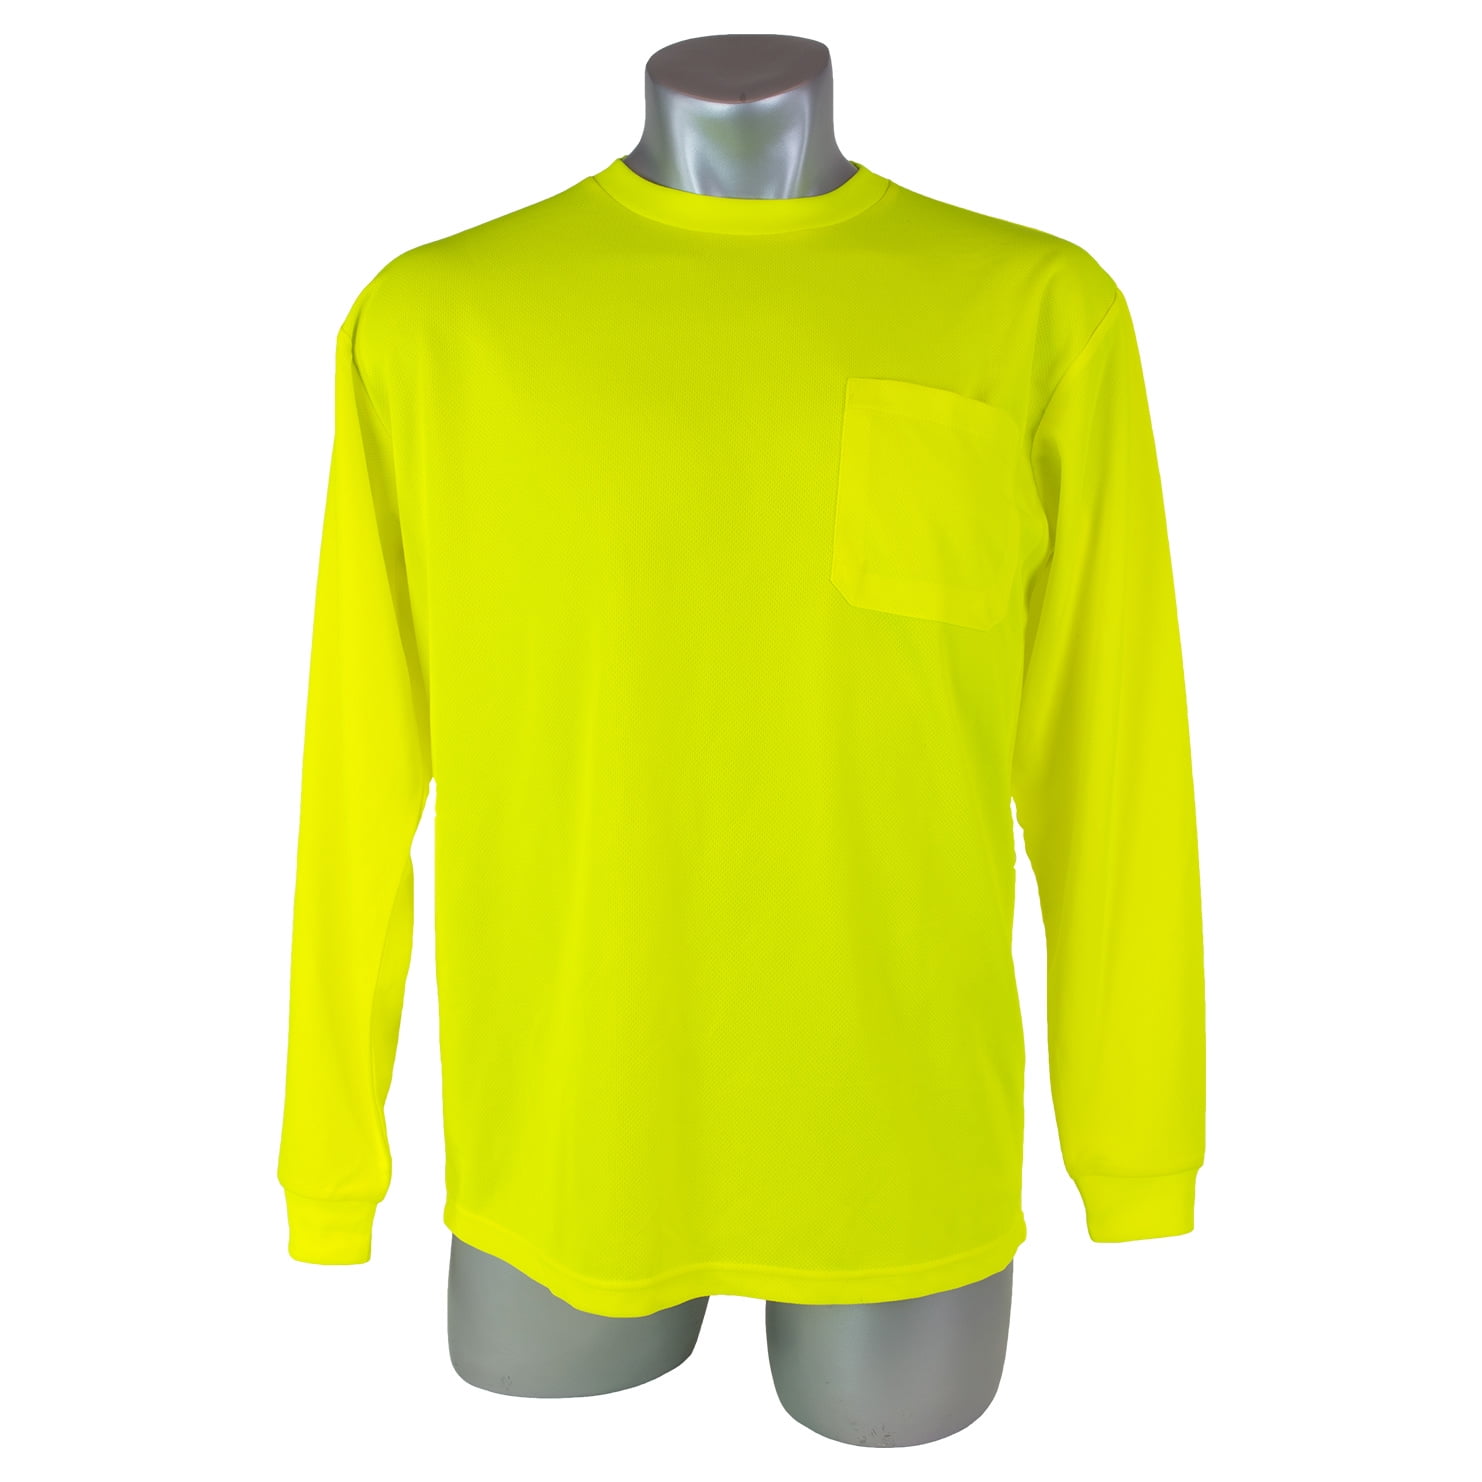 Details about   SAFETY TSHIRT Class 2 Max-dry Moisture Mesh Long Sleeve Lime 